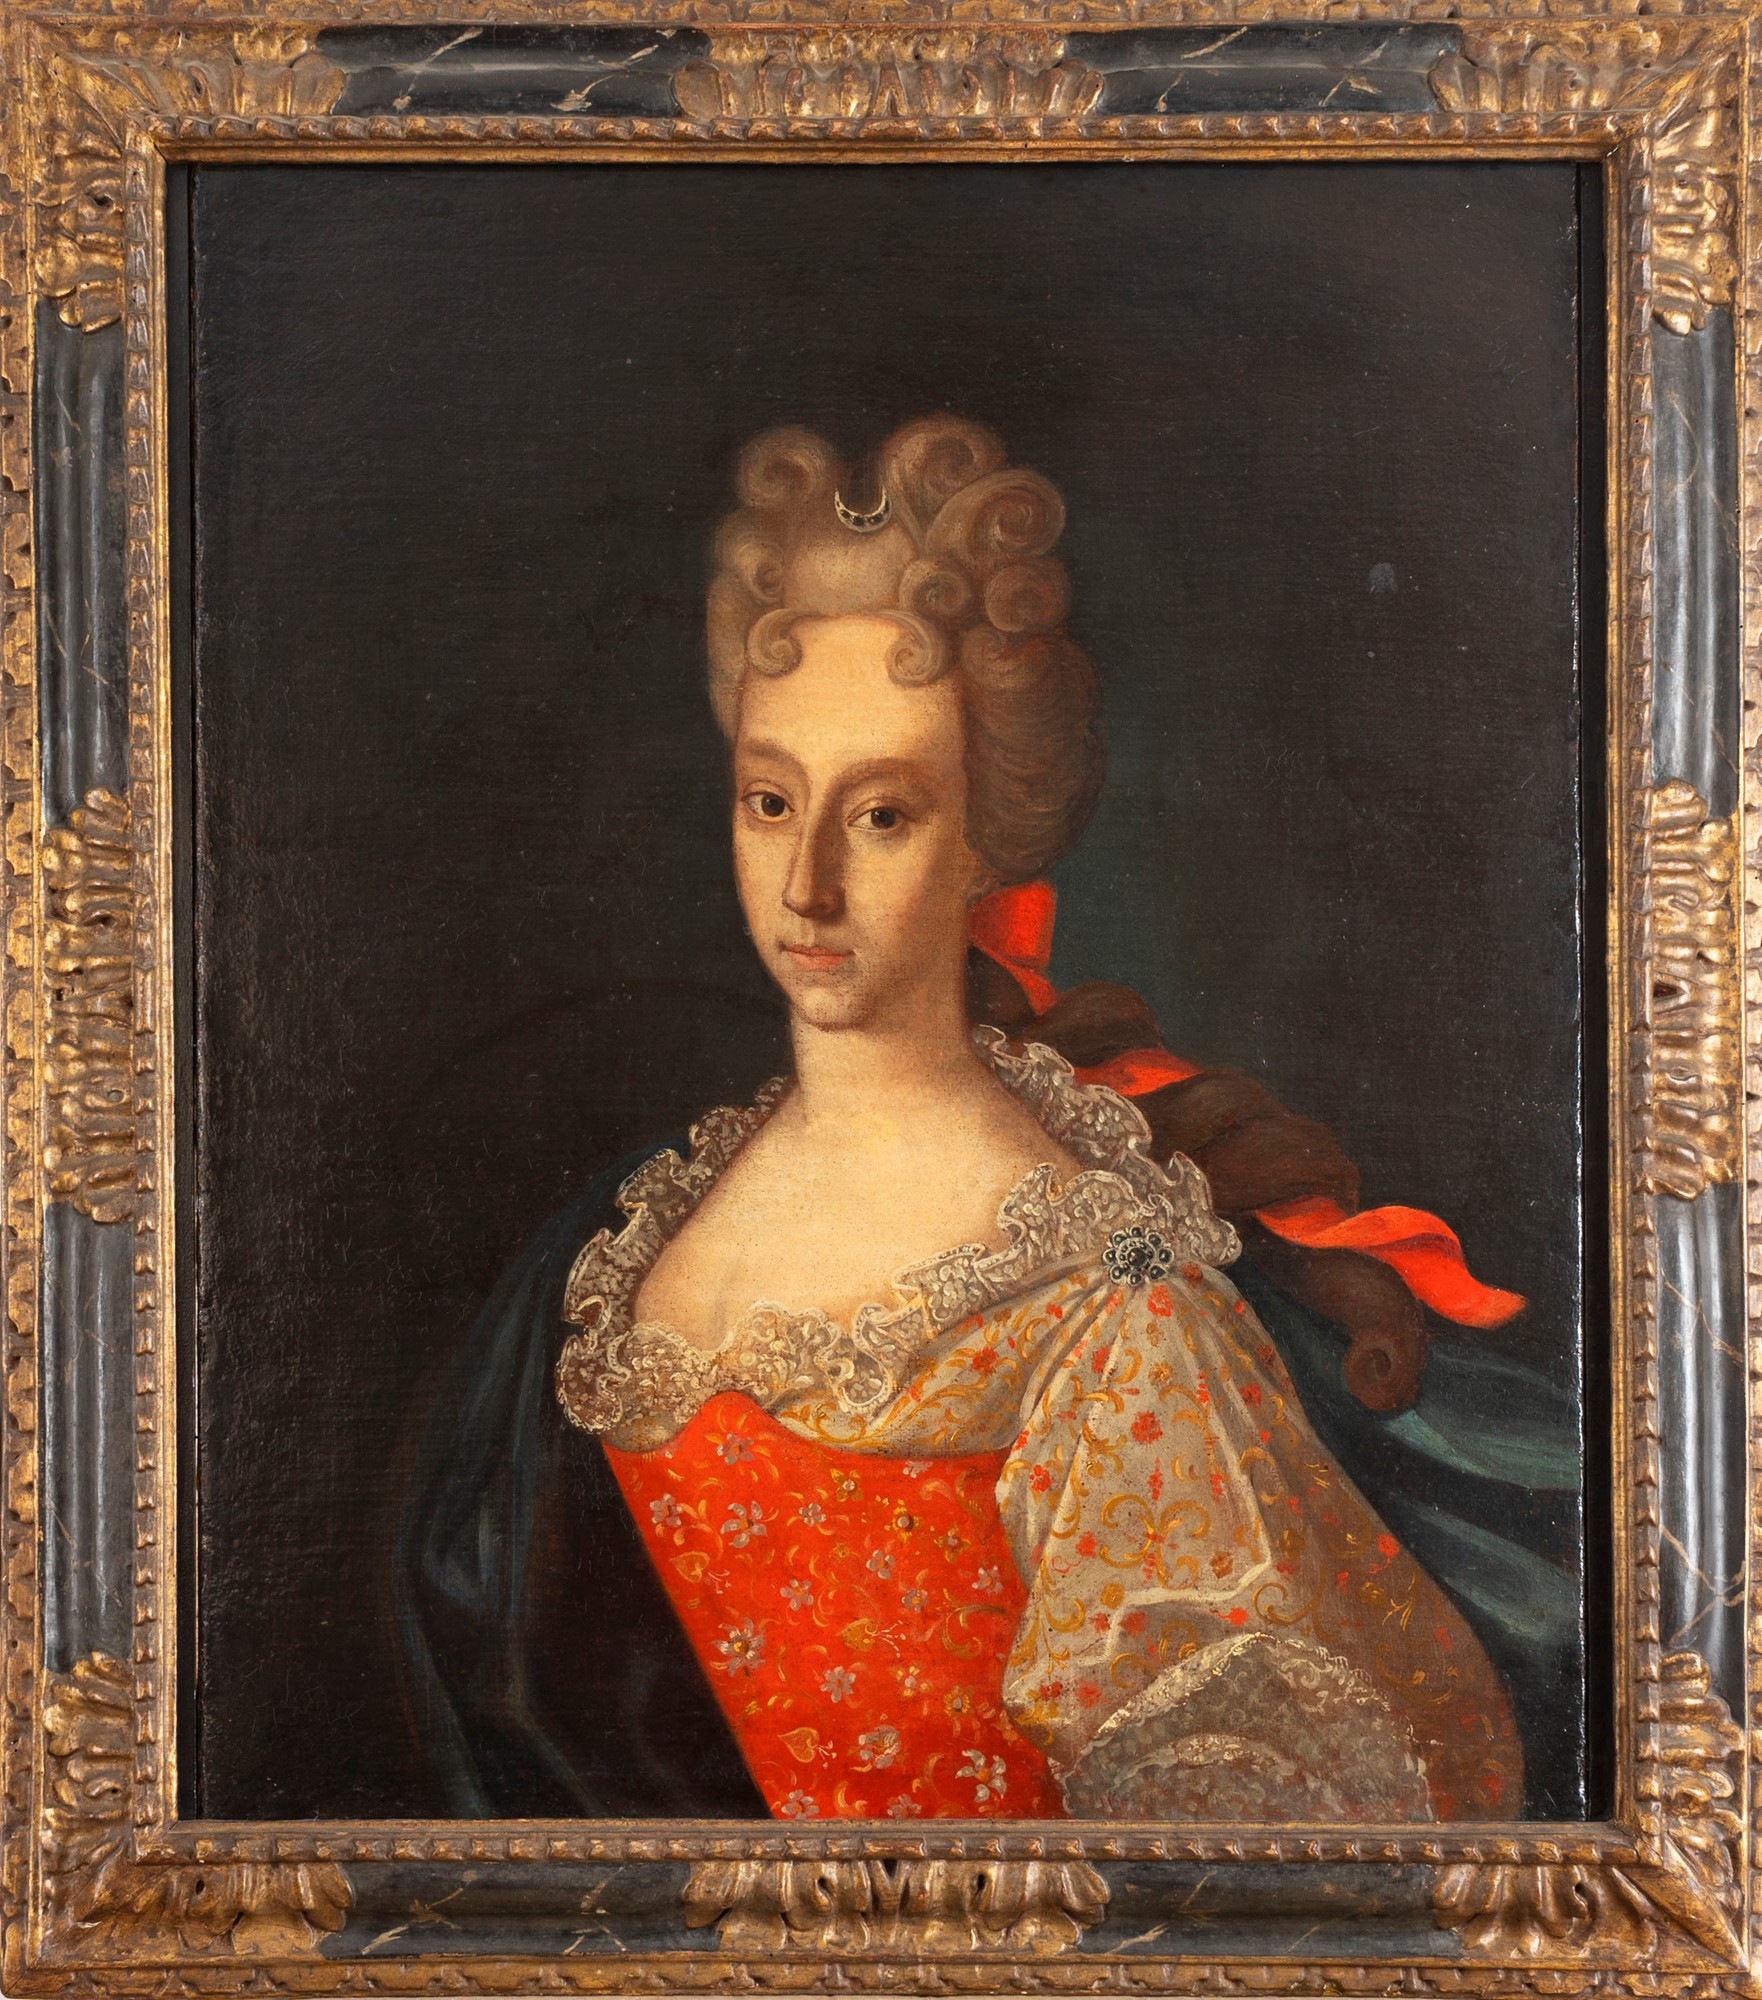 School of Northern Italy, XVIII century - Half-length portrait of a gentlewoman with a red bow - Image 2 of 3